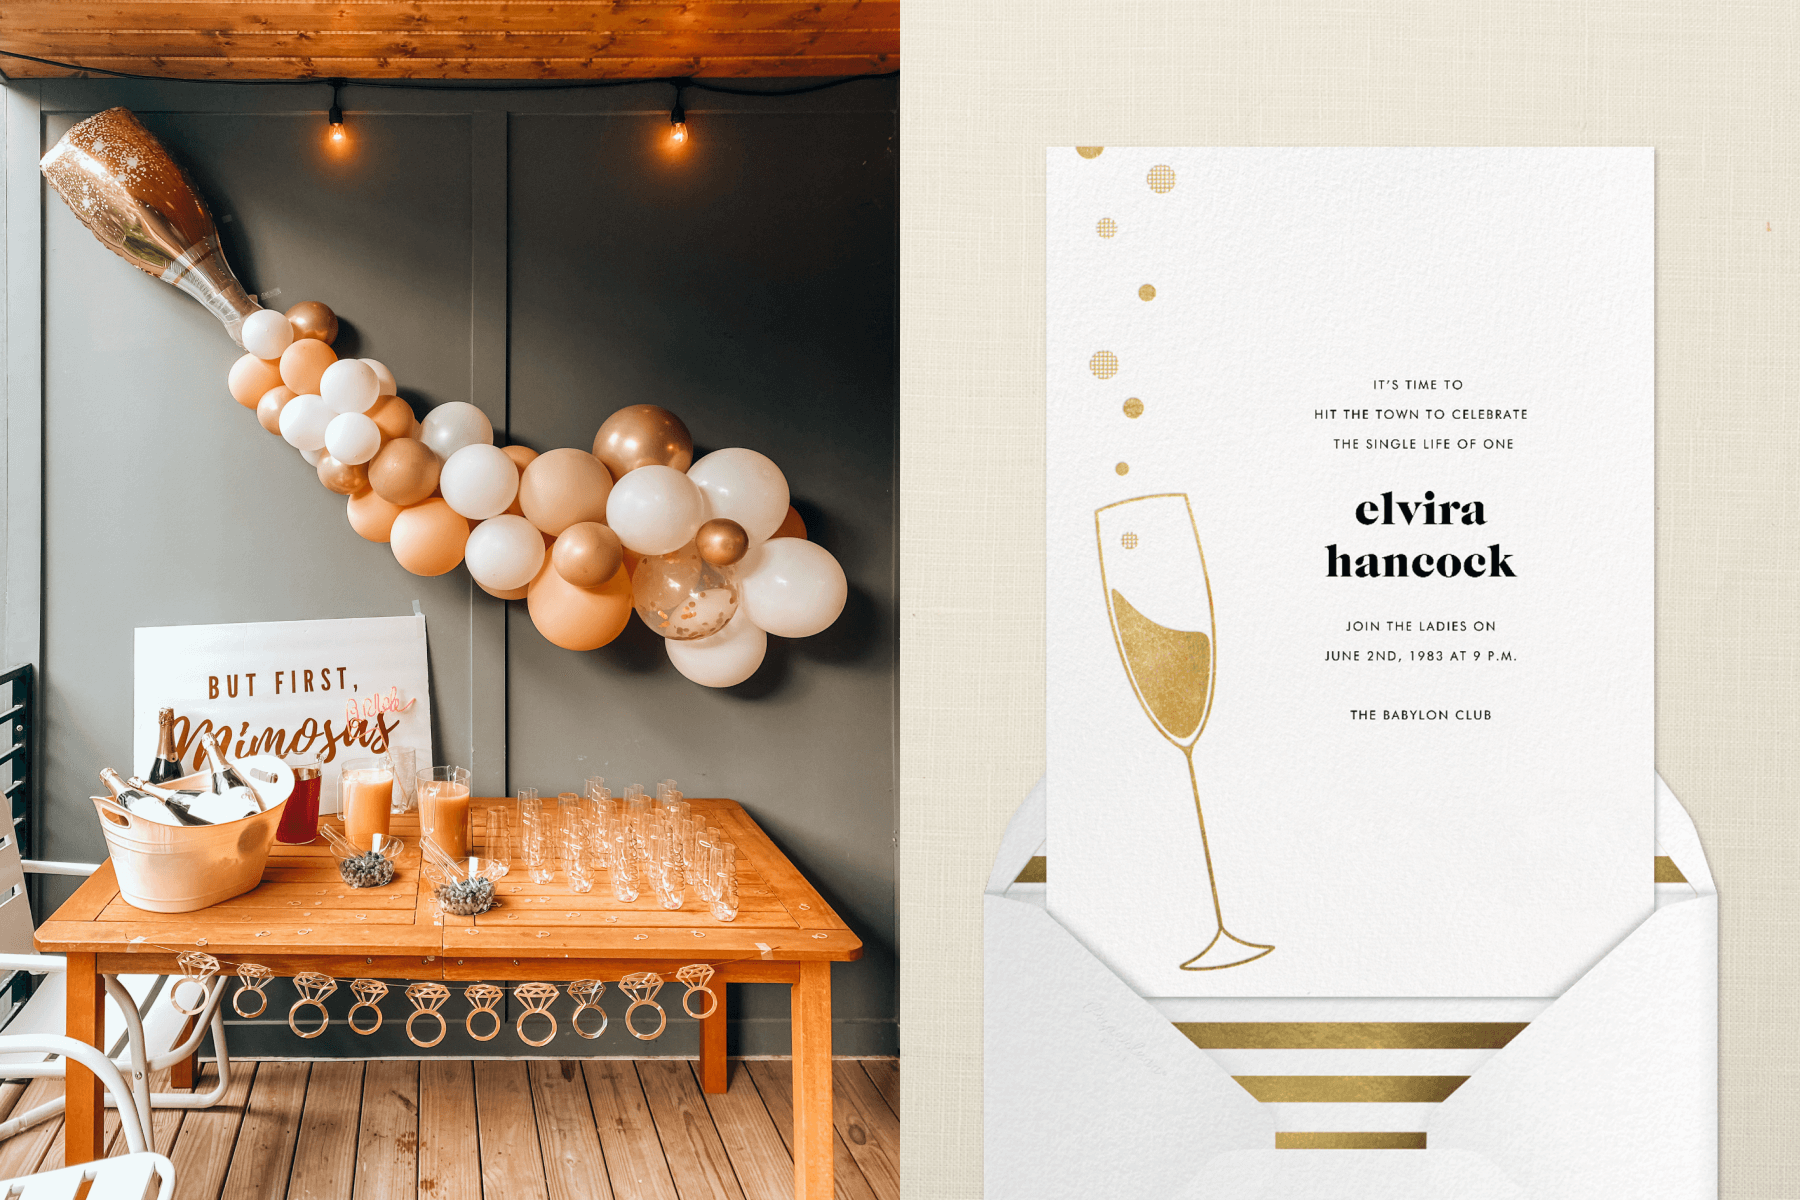 Left: A table set fot mimosas with glasses, pitchers, and sparkling wine beneath a balloon bottle pouring out balloons “bubbles.” Right: A bachelorette party invitation with a gold Champagne flute with bubbles drifting out.